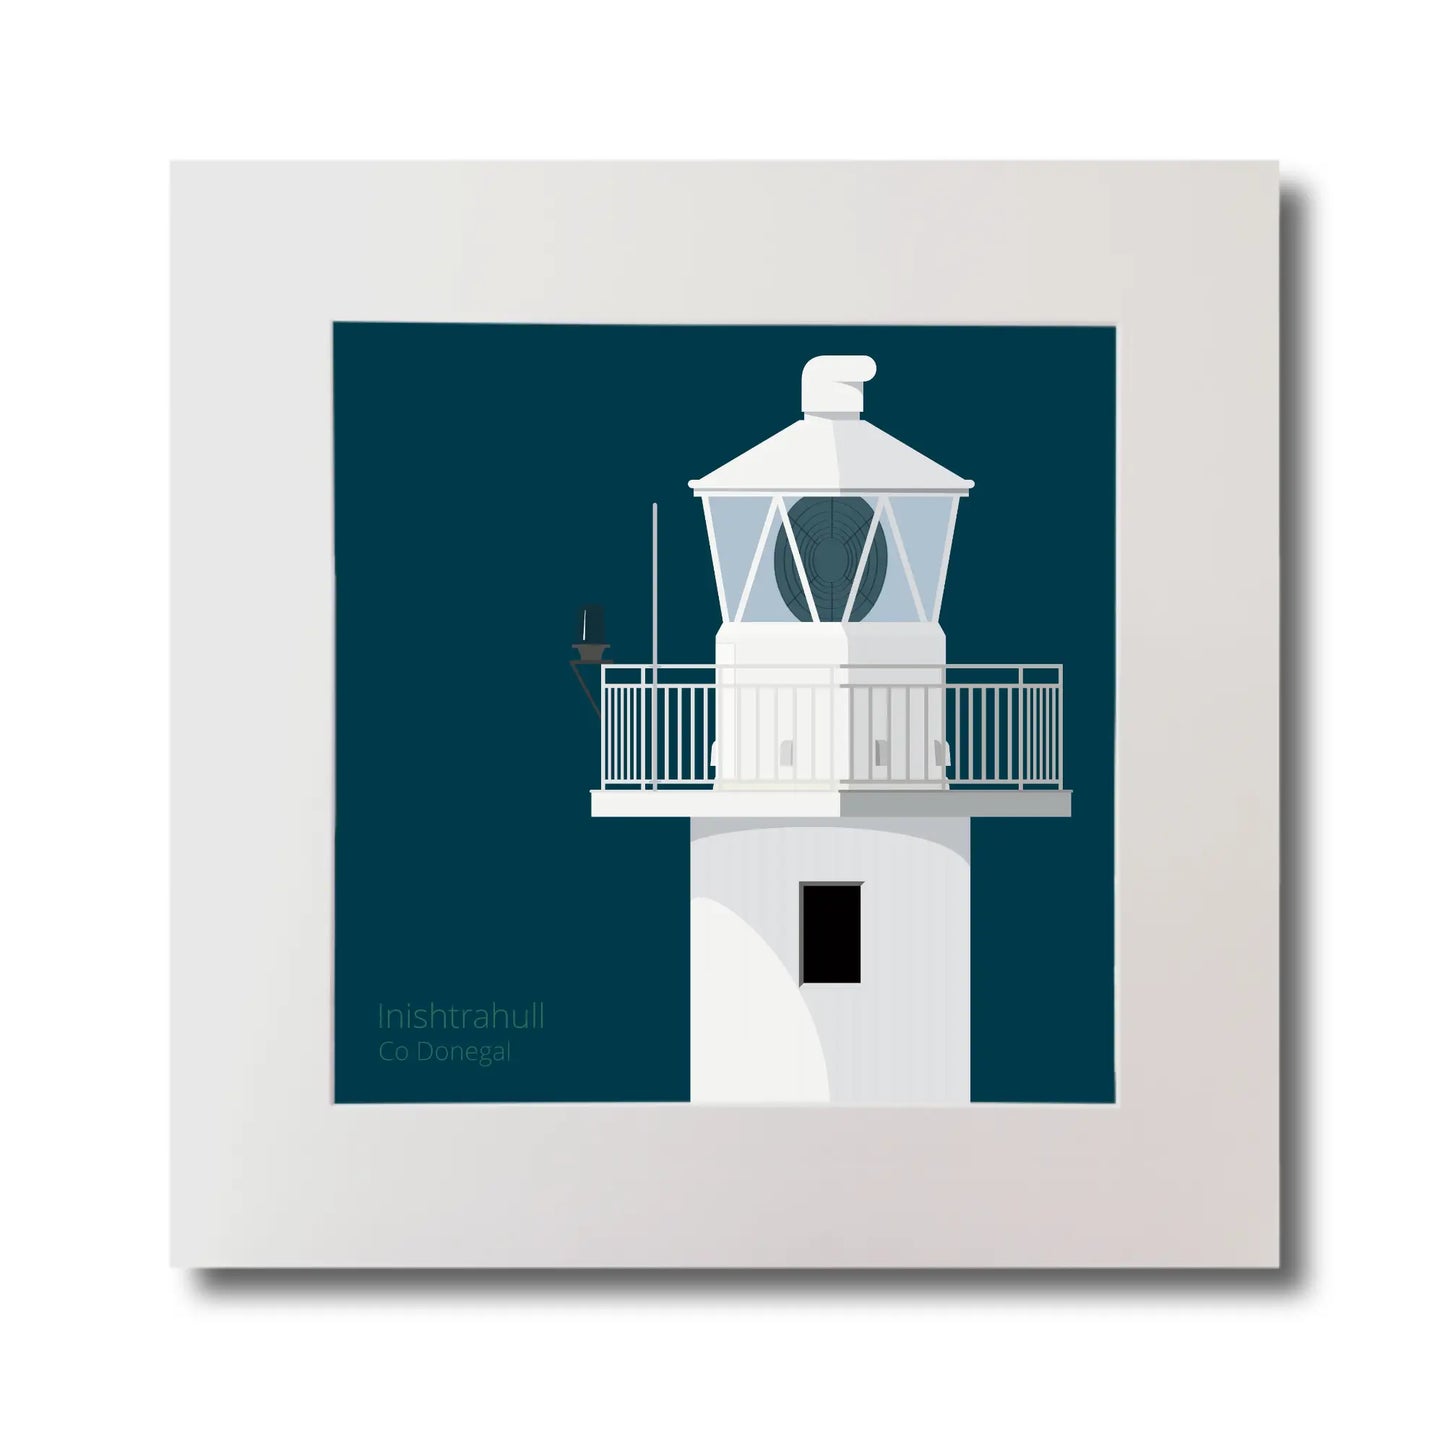 Illustration of Inishtrahull lighthouse on a midnight blue background, mounted and measuring 30x30cm.